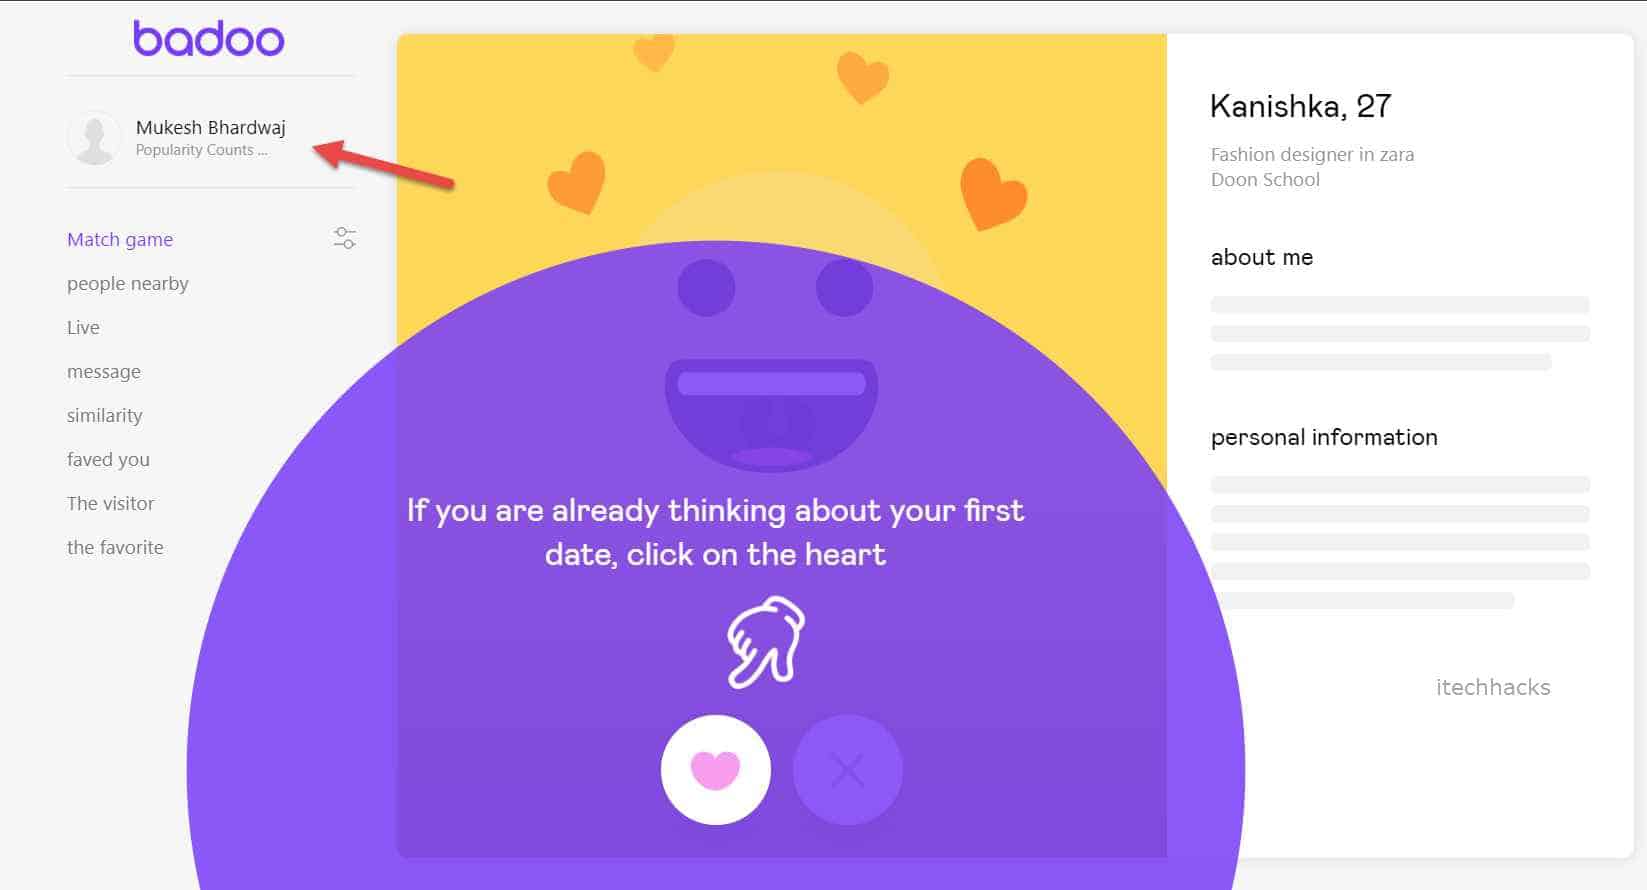 How to delete badoo withpout verification